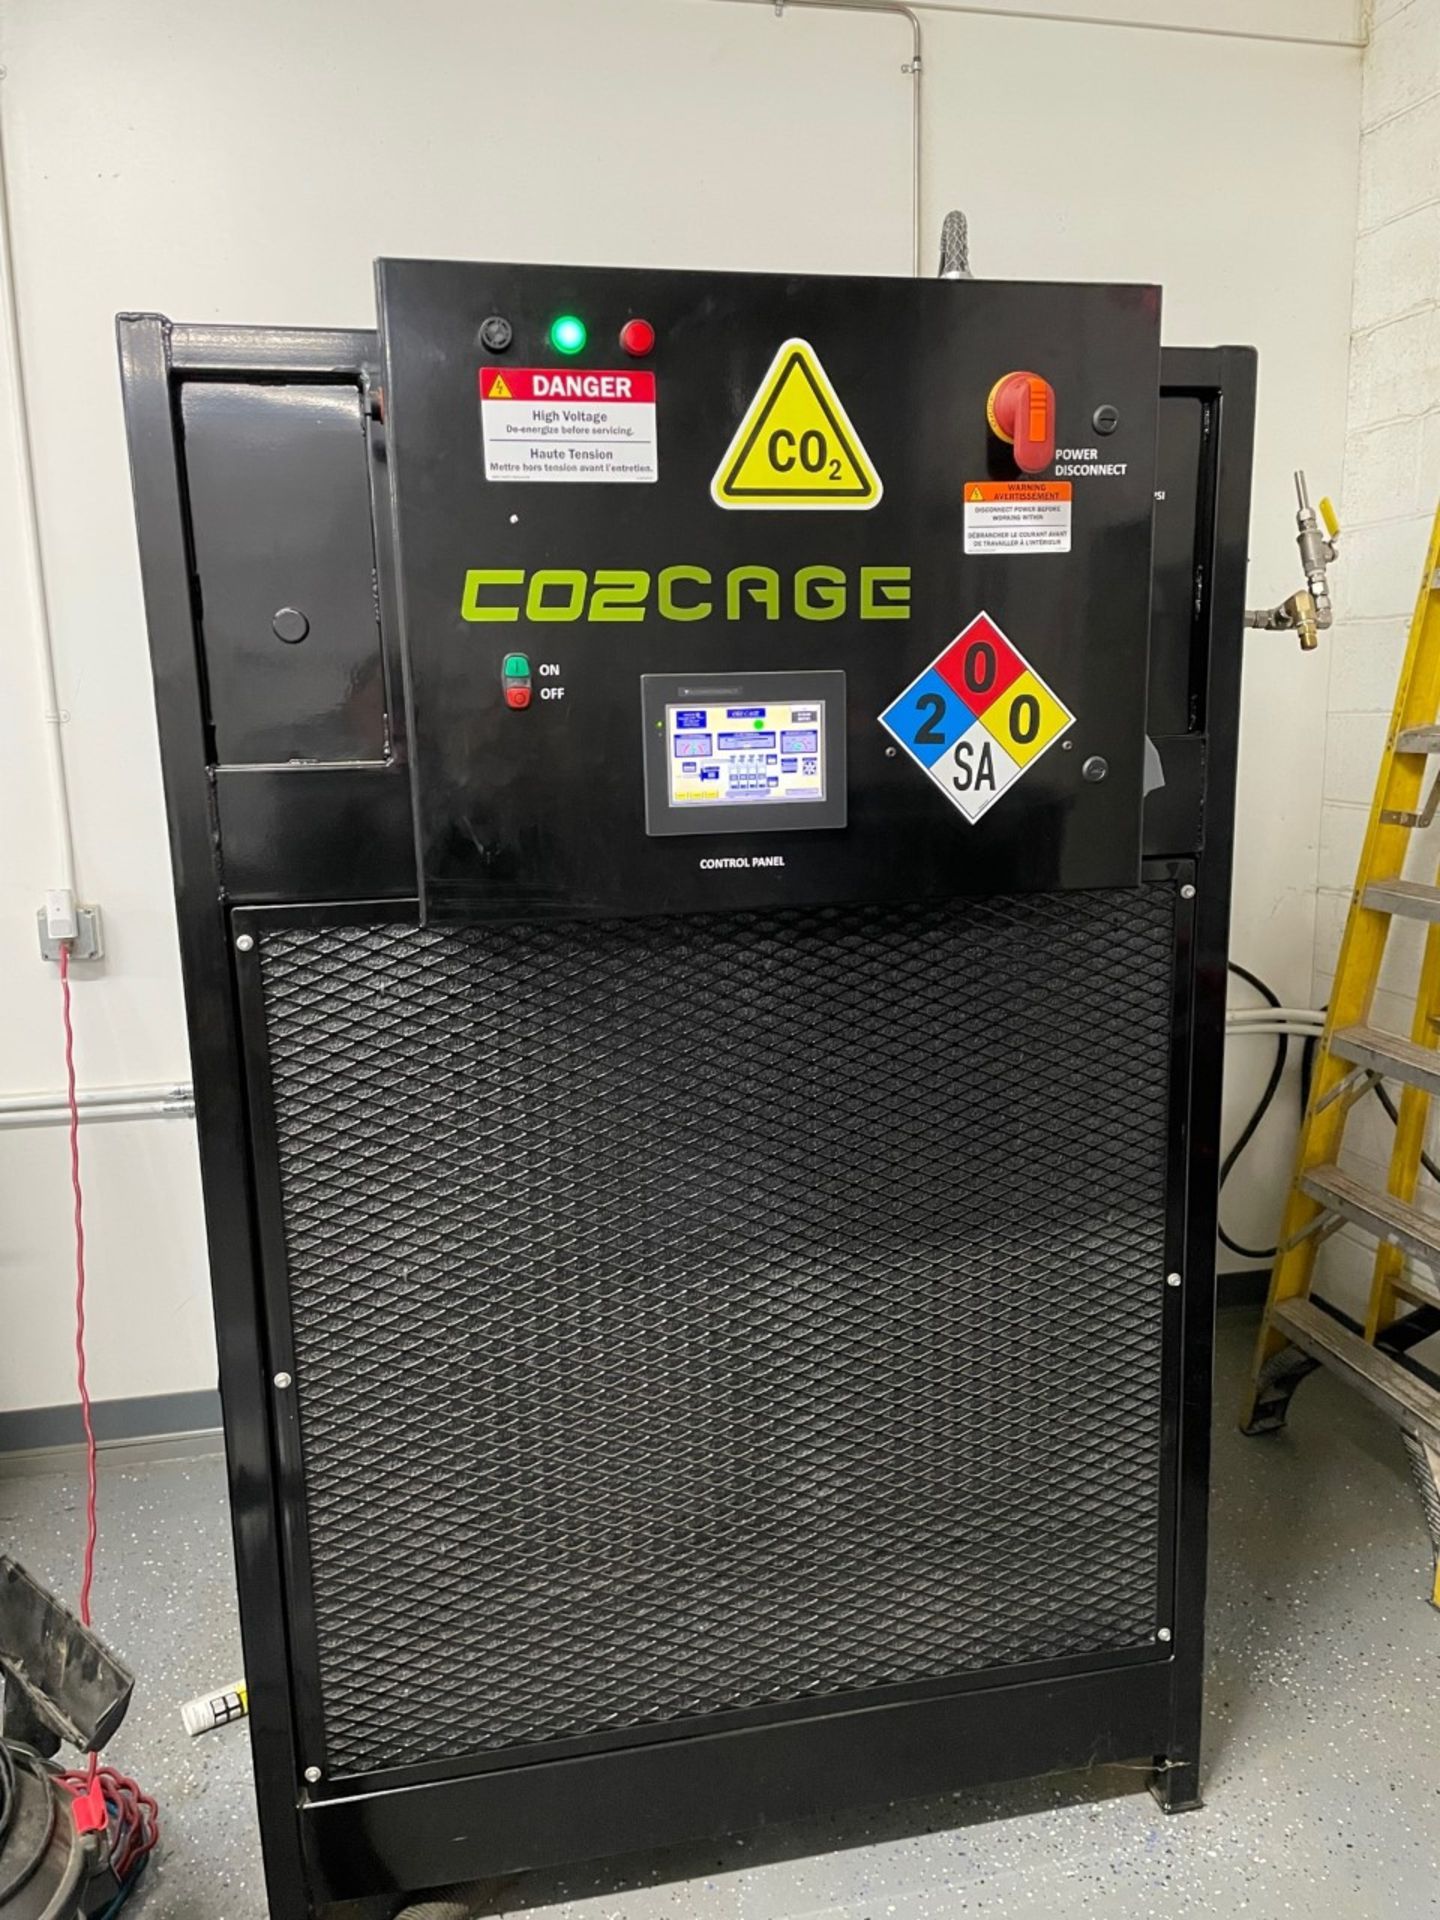 Used- ExtraktLAB CO2 Extraction System w/ PolyScience Chiller & CO2 CAGE Unit. Turn Key Model E-140. - Image 2 of 13